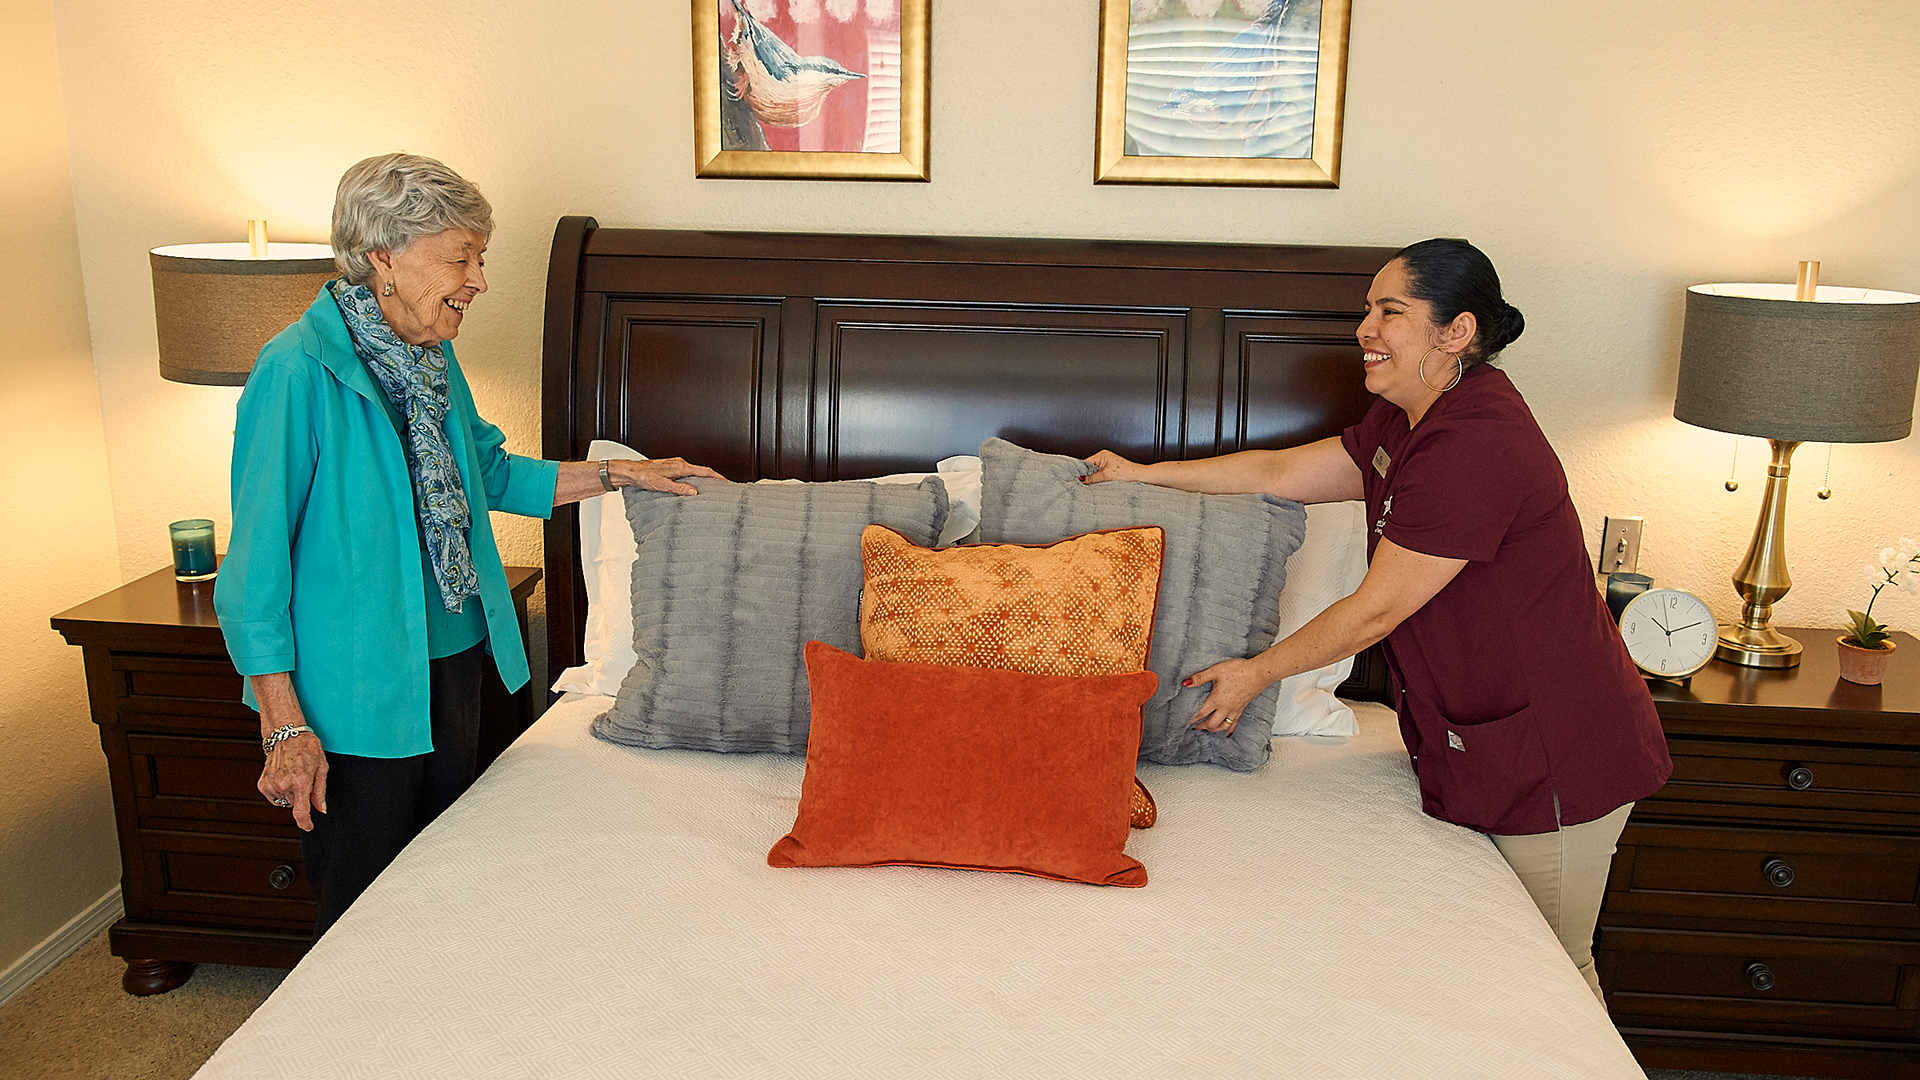 Featured image for “Maybe It’s Time: When to Consider Assisted Living”